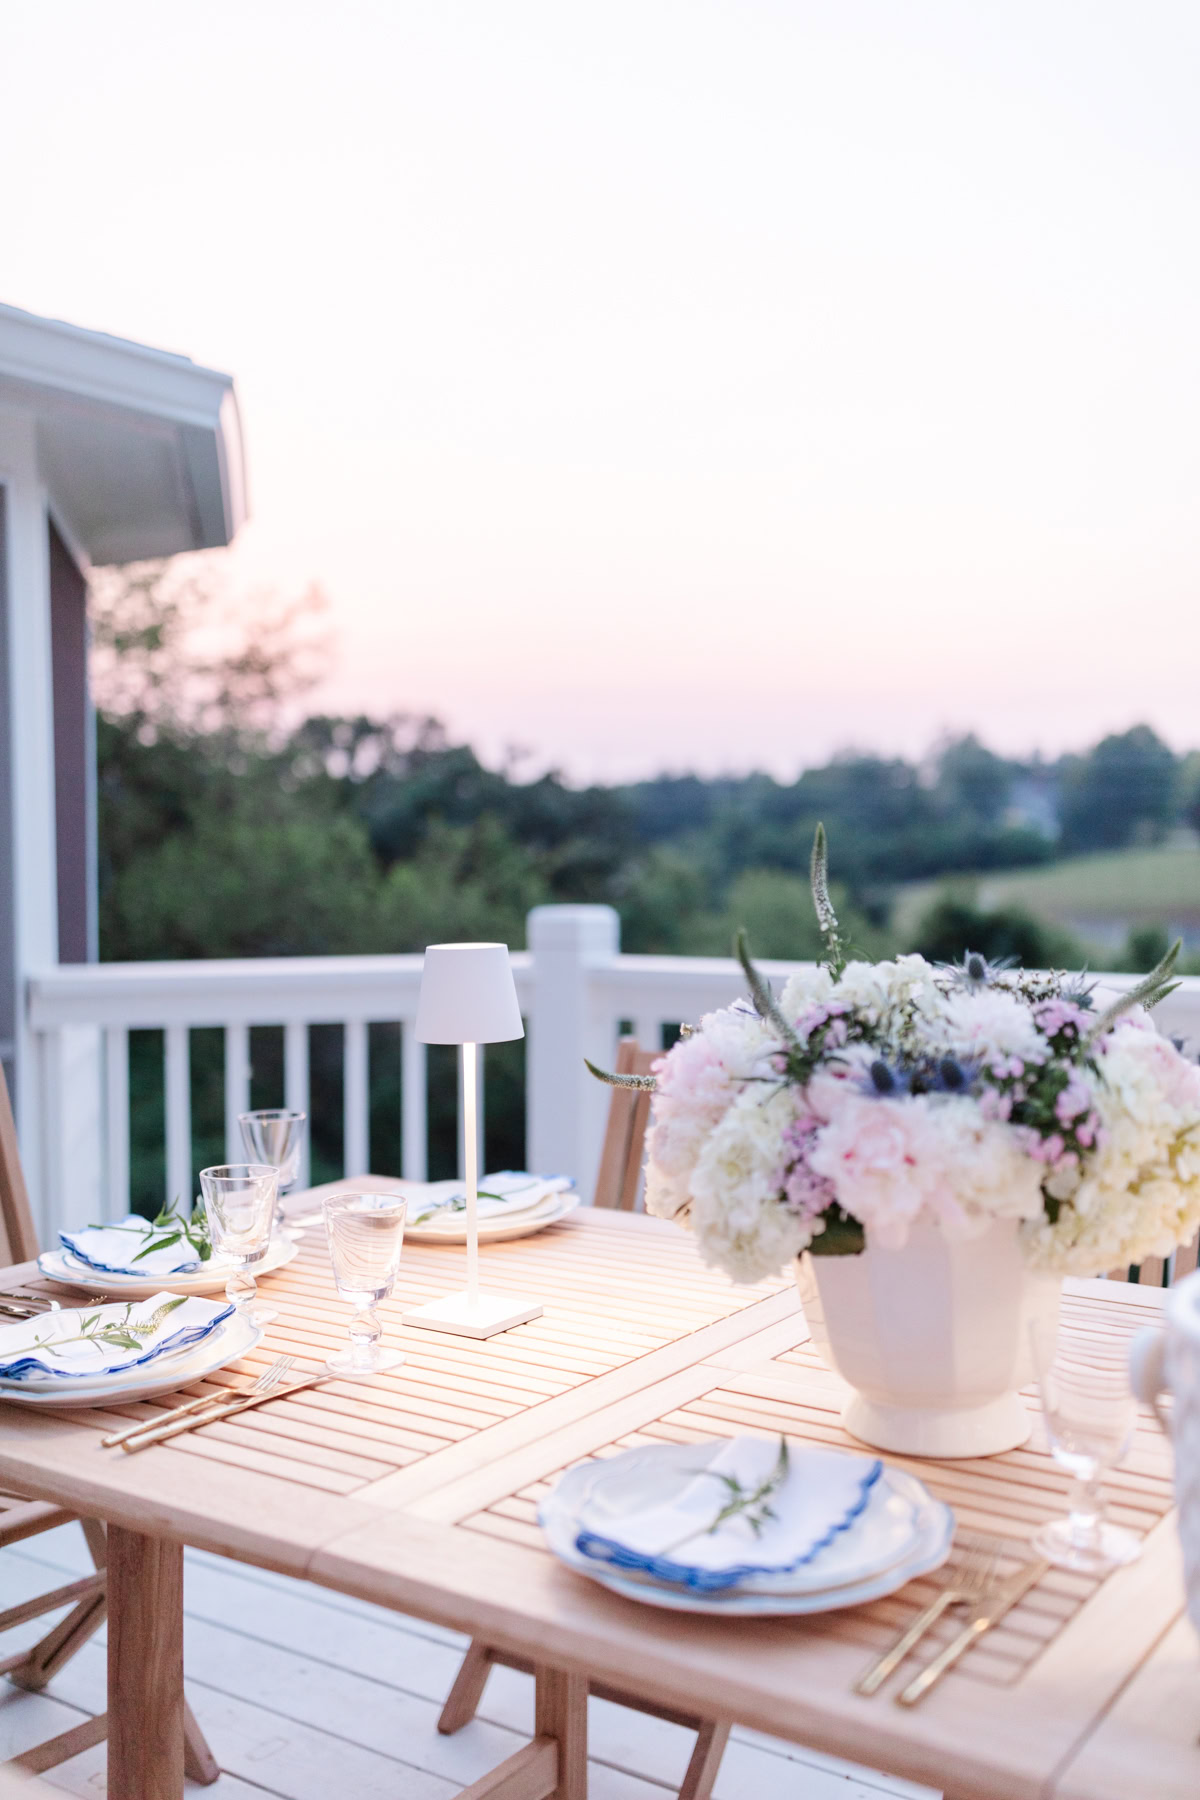 An outdoor dining table set with plates, glassware, and a floral centerpiece against a backdrop of trees and a pastel sky at sunset, showcasing the best deck stain to enhance your serene setting.